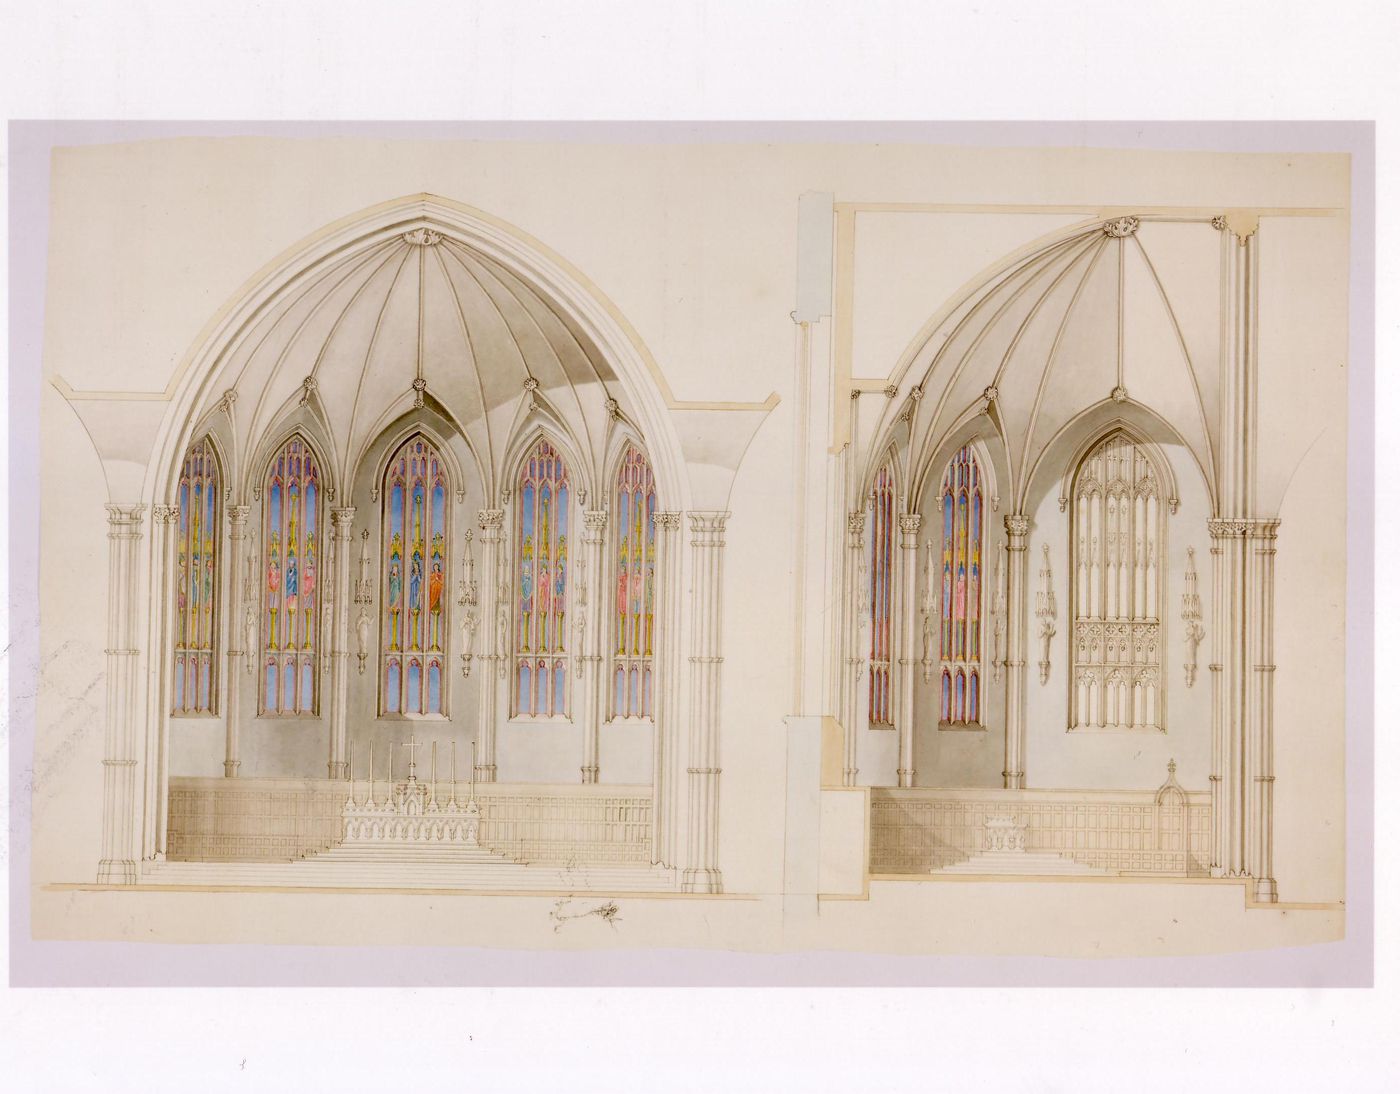 Elevation and section for the choir for the interior design by Bourgeau et Leprohon for Notre-Dame de Montréal